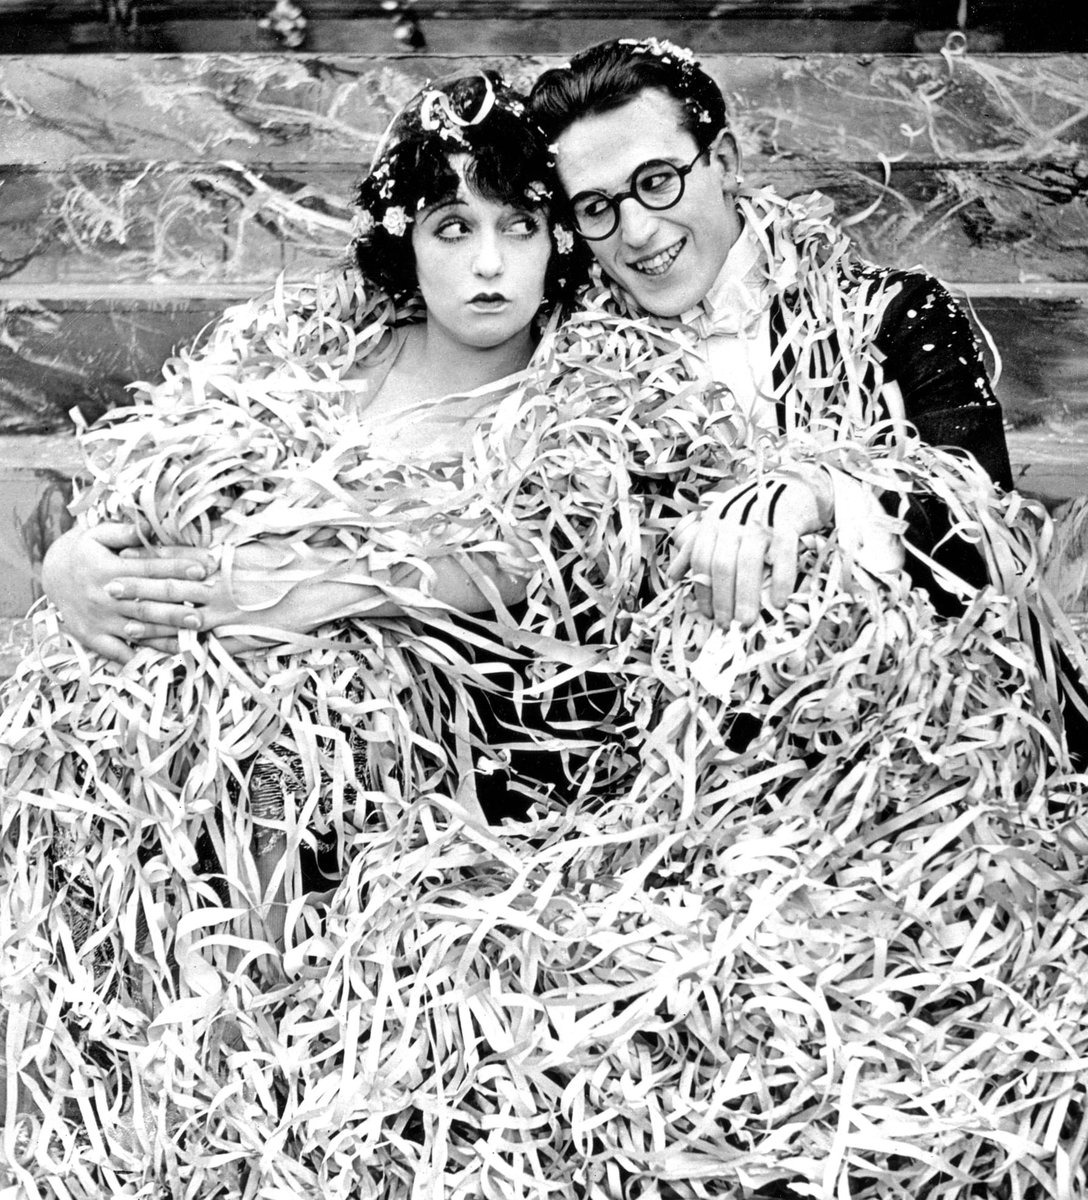 Harold Lloyd and Bebe Daniels in Bashful (1917), one of the many shorts they appeared in together in the 1910s. They were such a great pair!